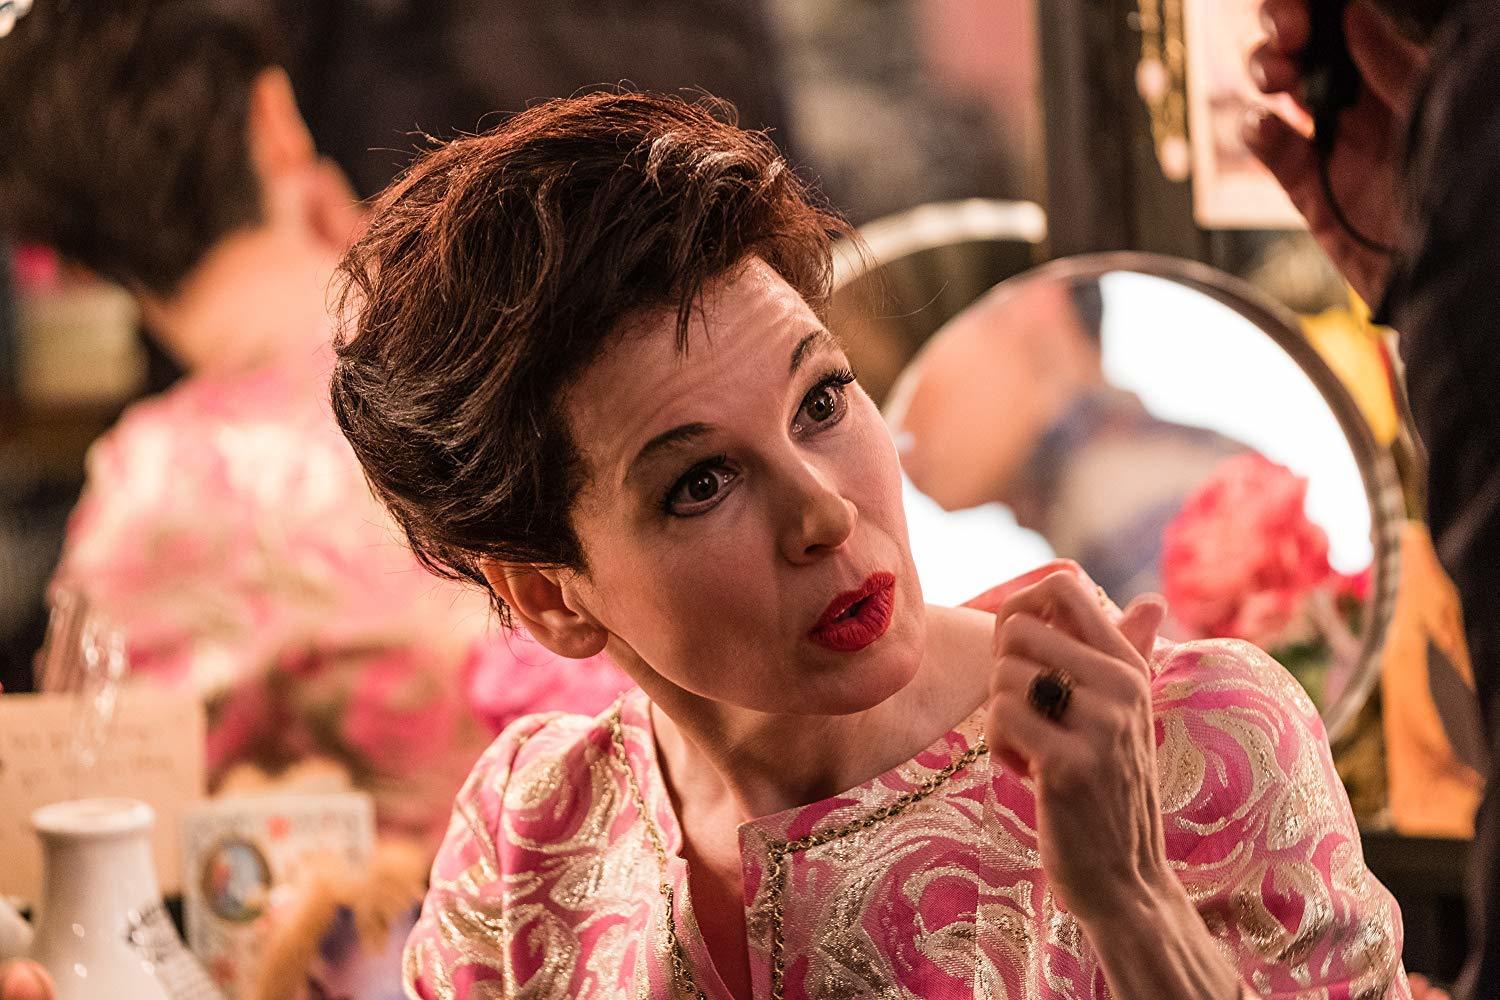 It's a tight field in the Best Actress in a Lead Role category but Renee Zellweger may have the edge for her portrayal of Judy Garland in the biopic 